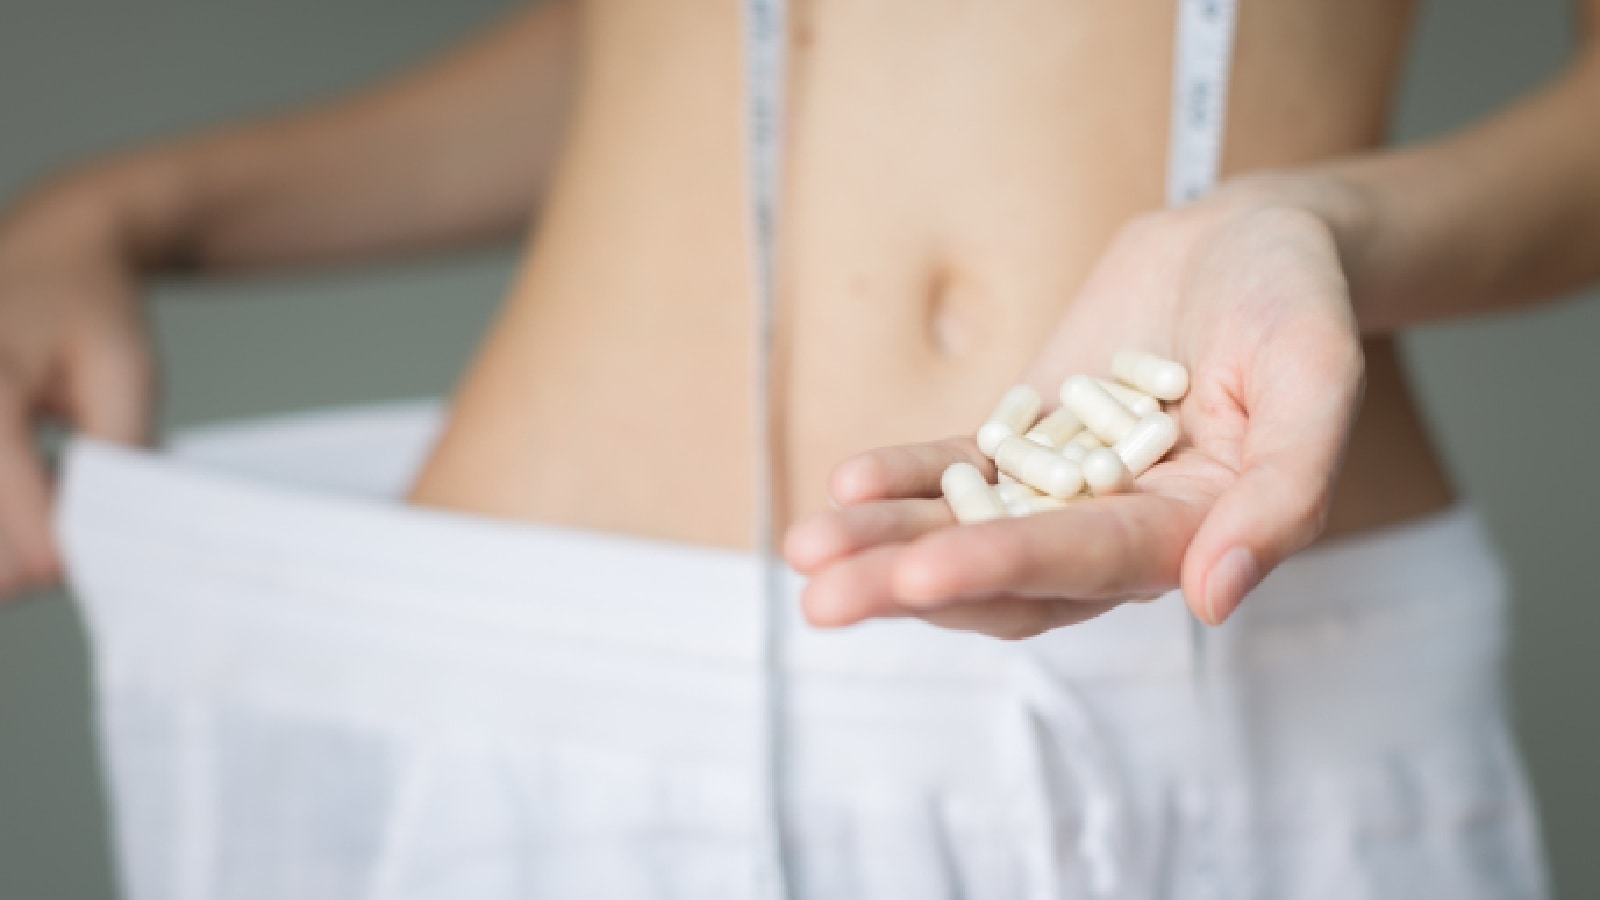 Weight loss pills may lead to stomach paralysis, finds new study